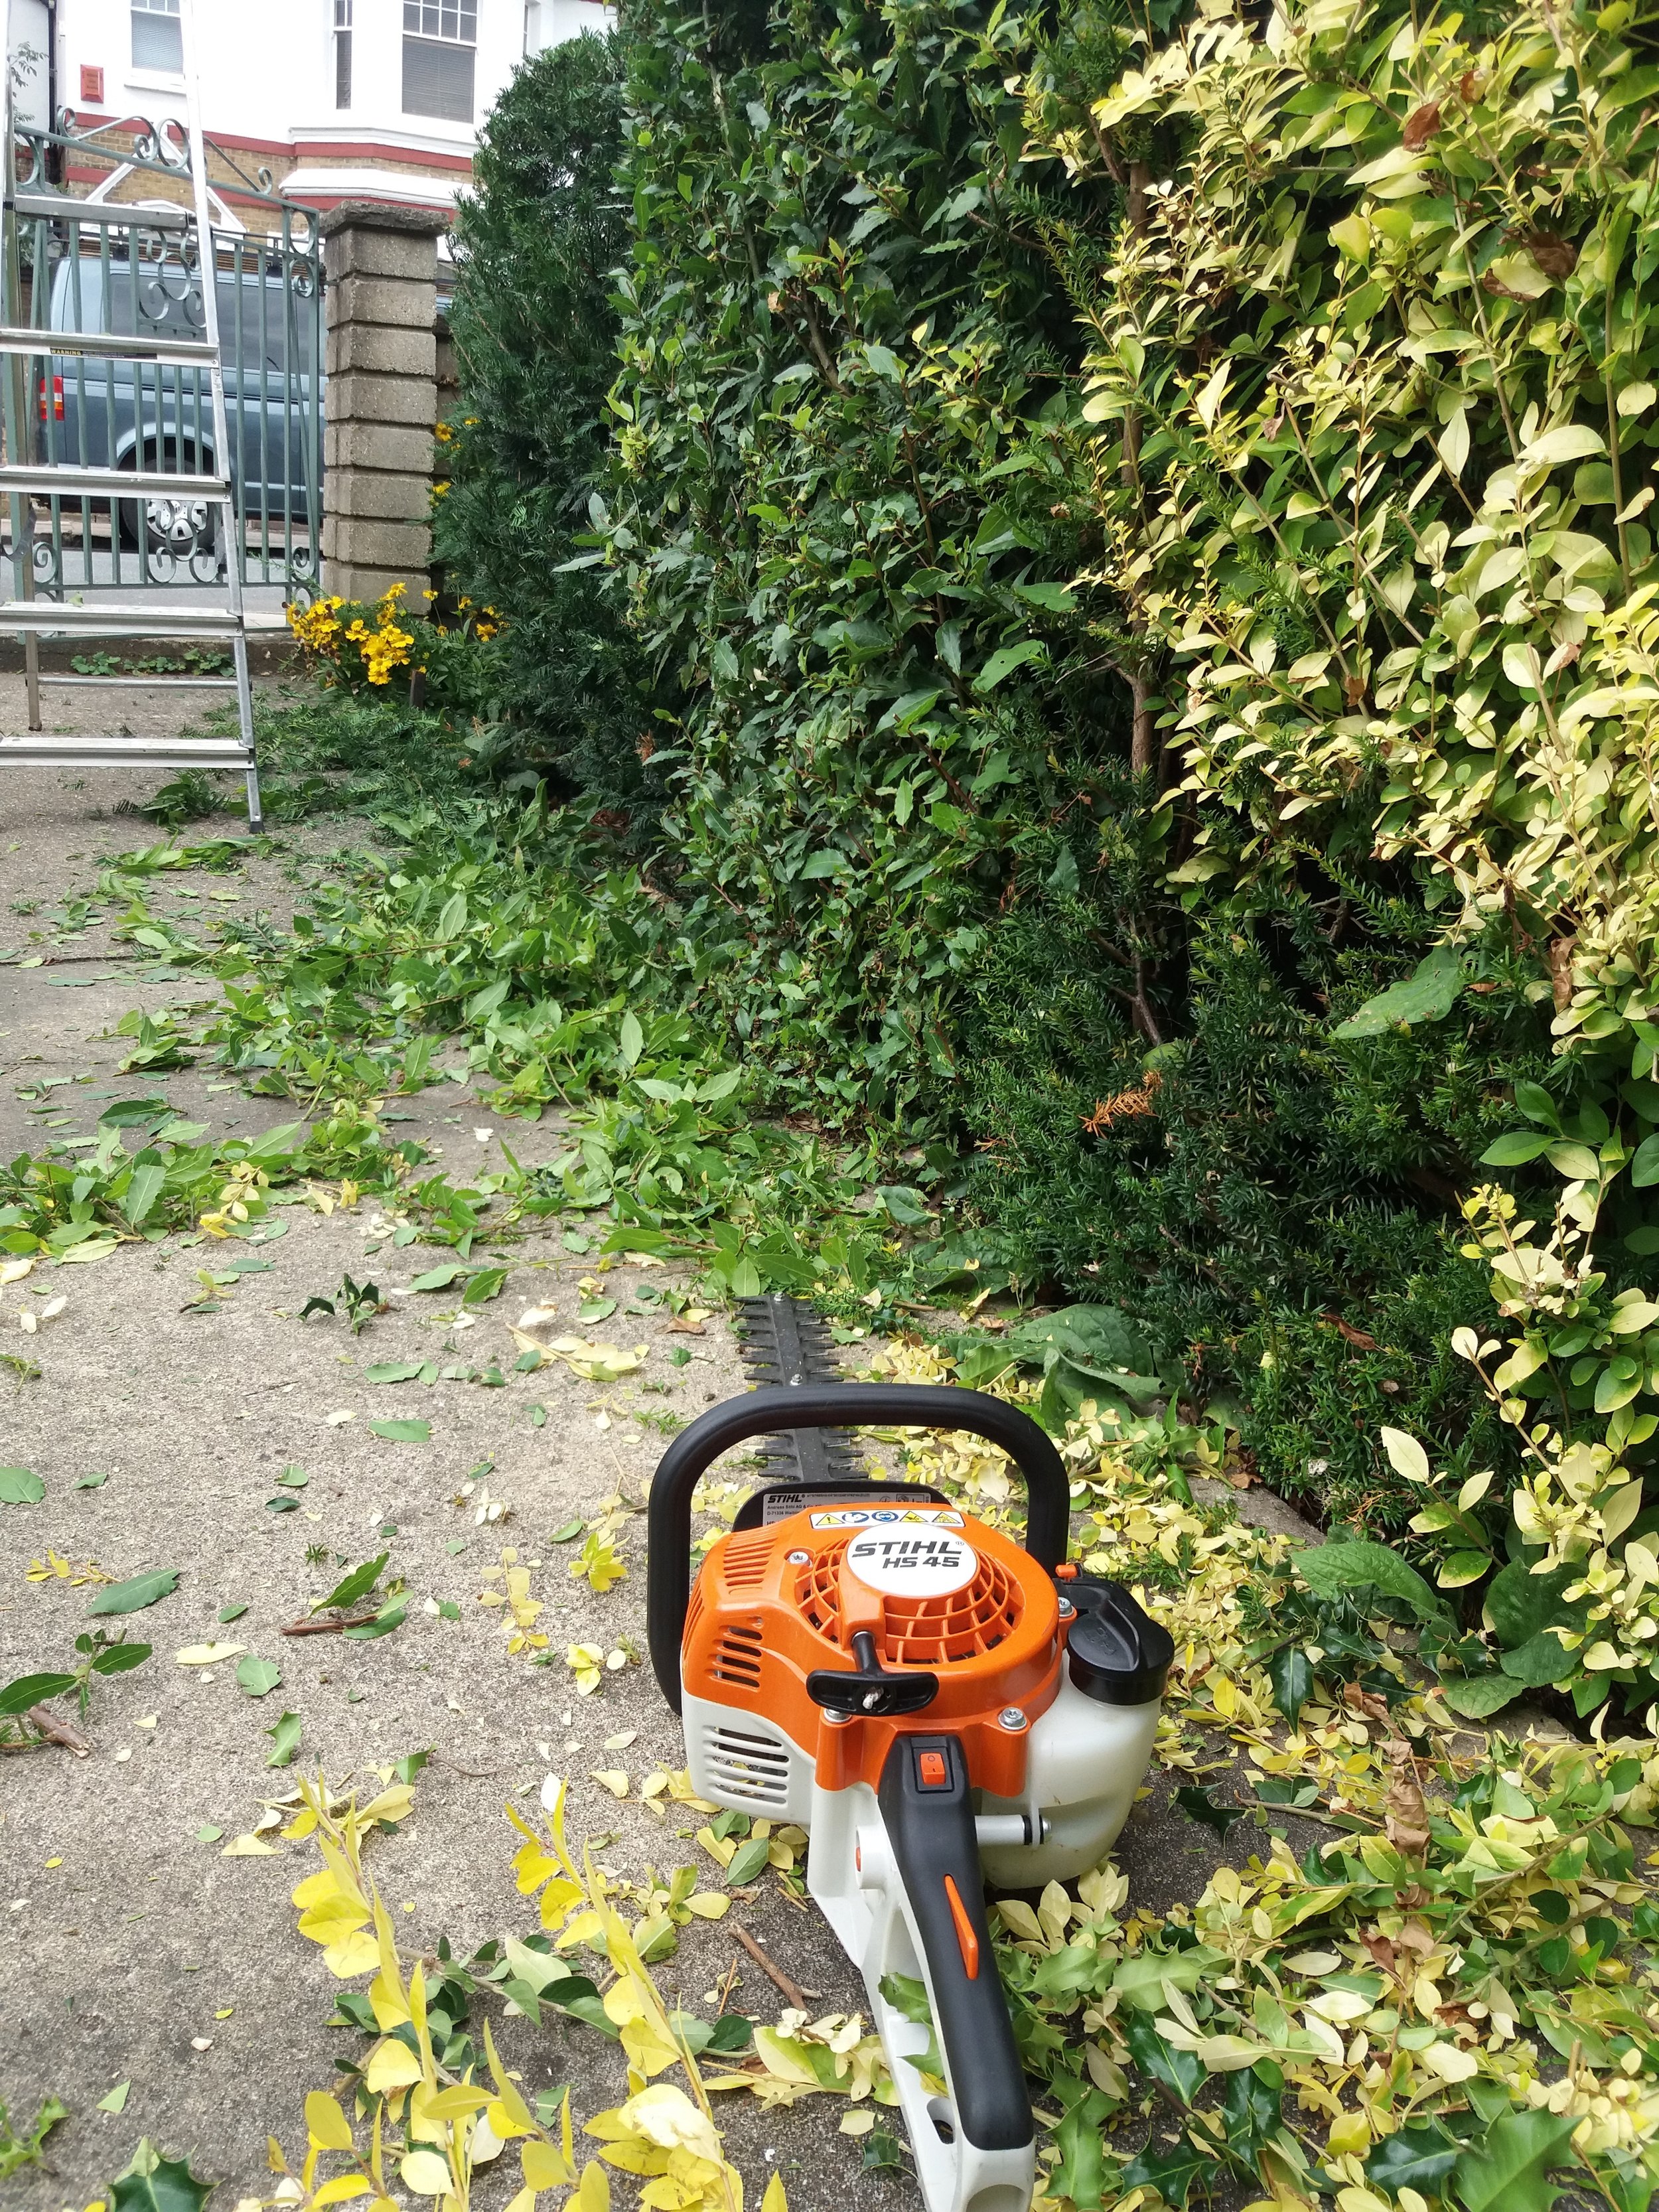 Hedge cutting, August 2018